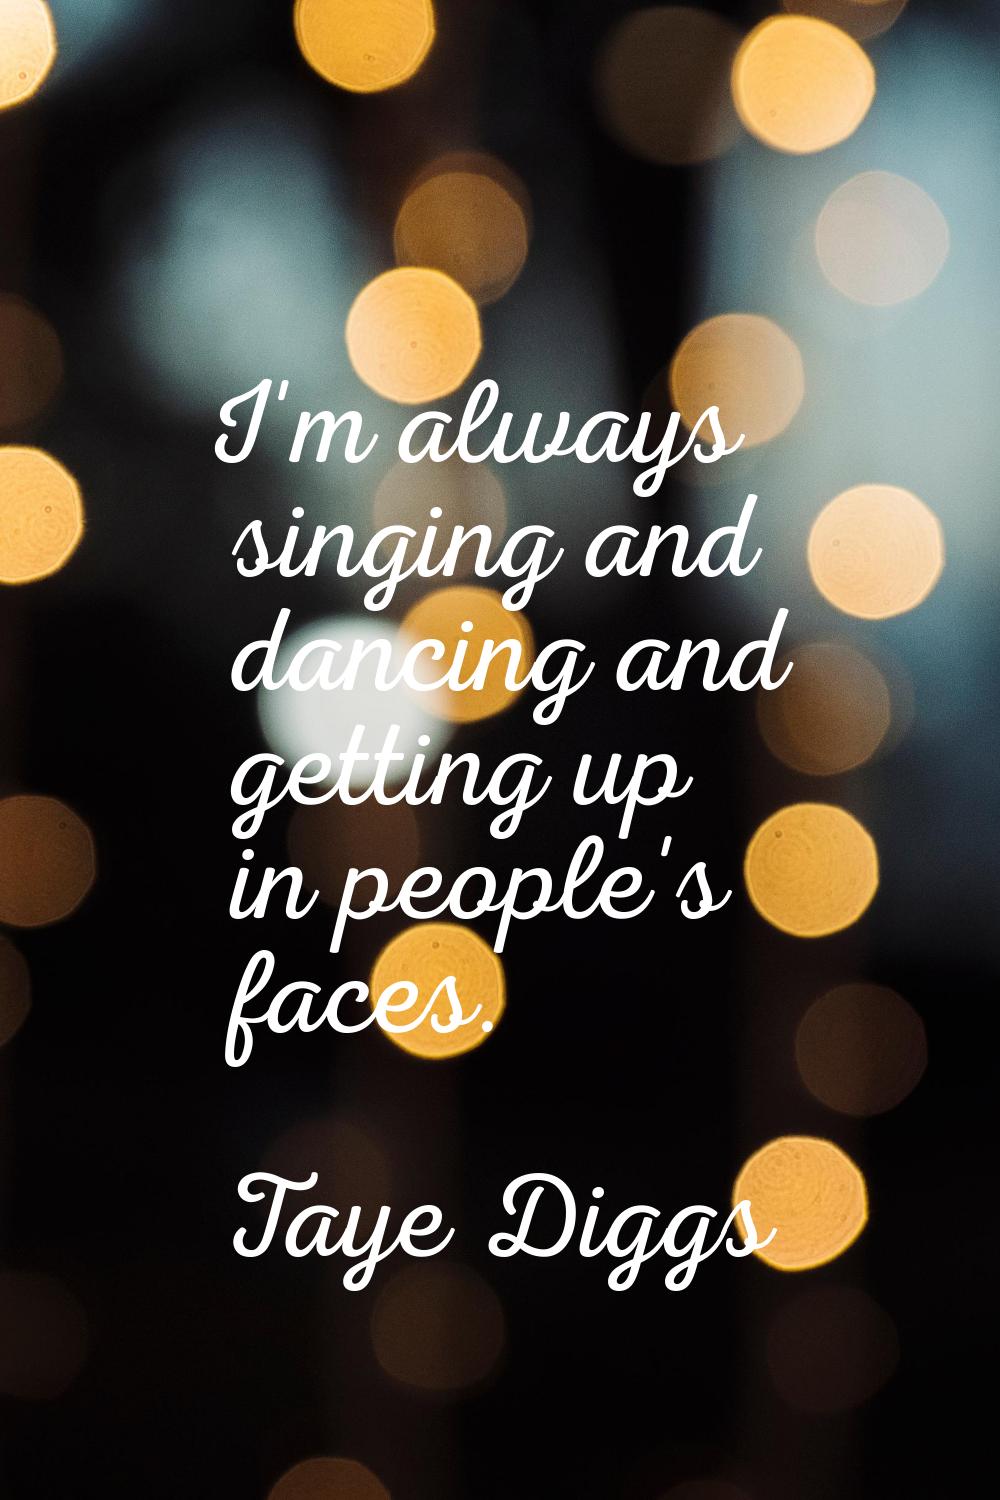 I'm always singing and dancing and getting up in people's faces.